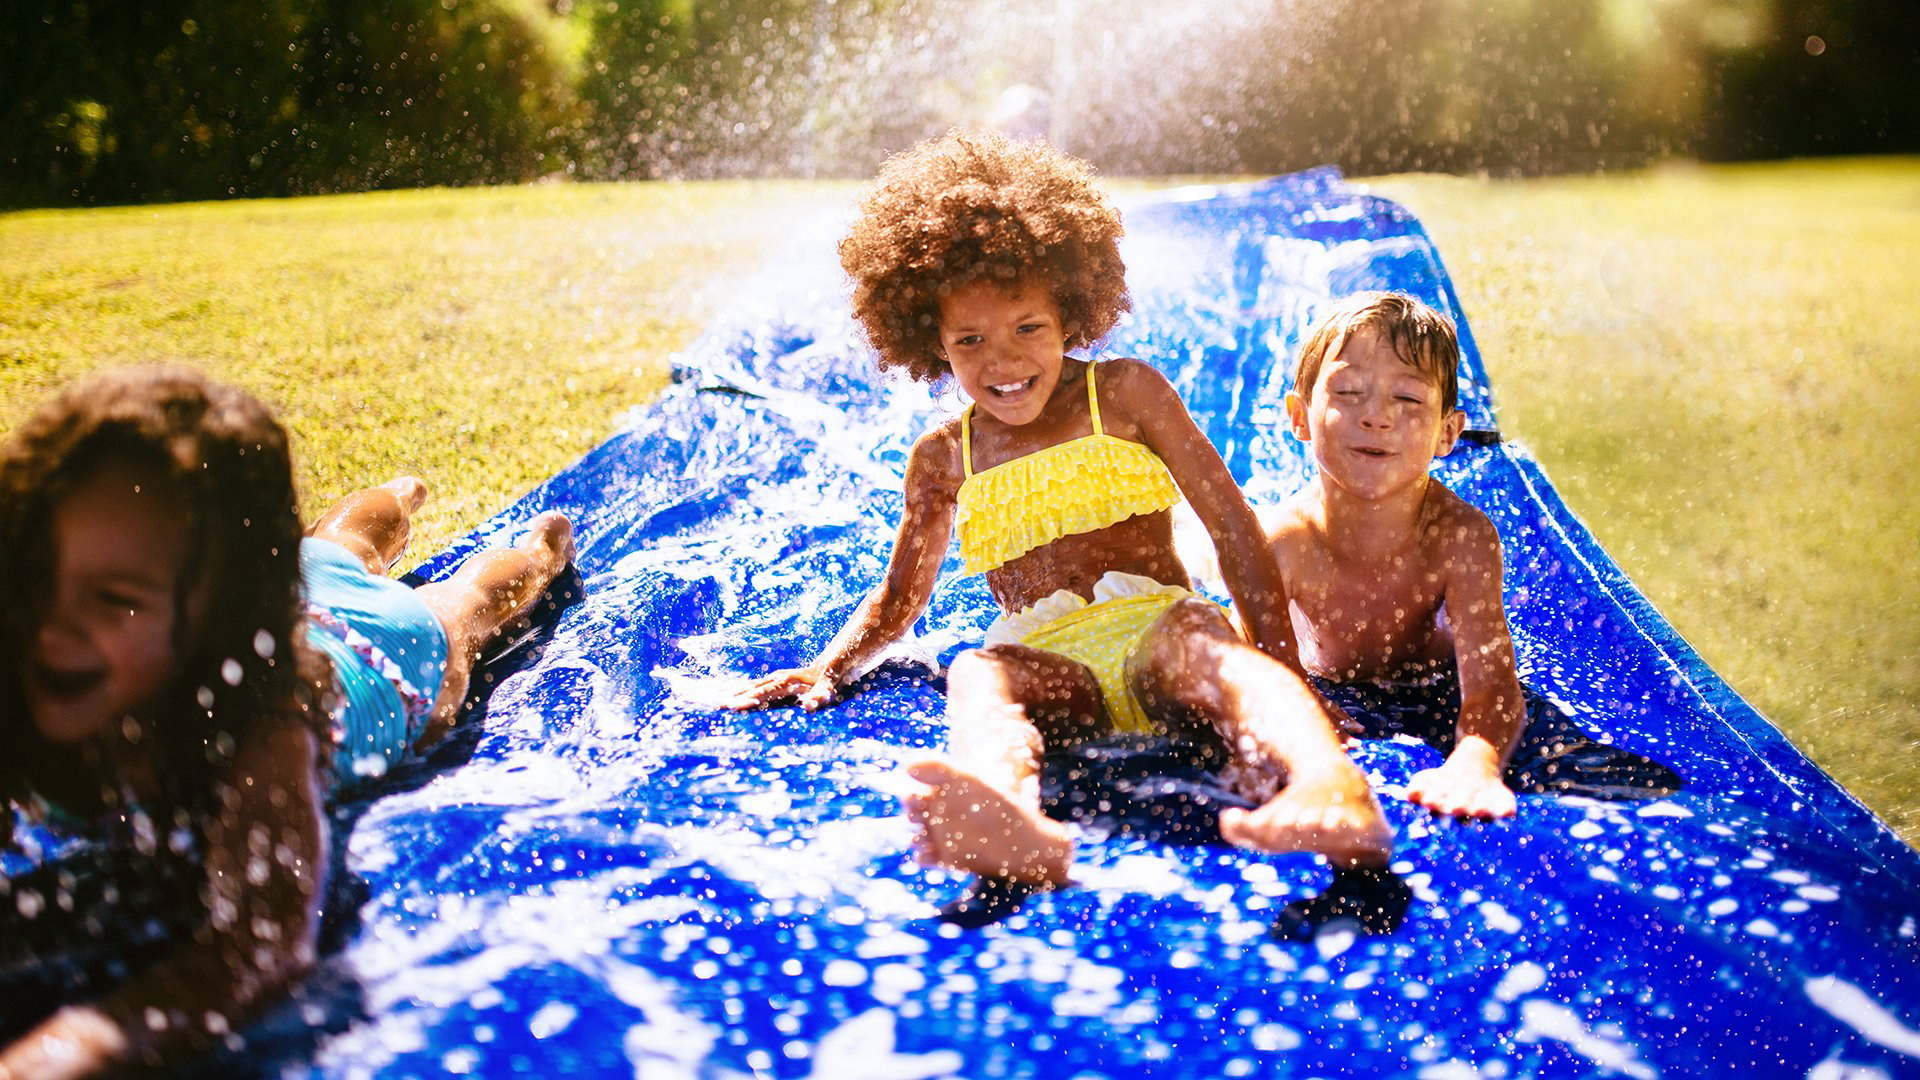 How to find fun, free summer activities for kids and teens